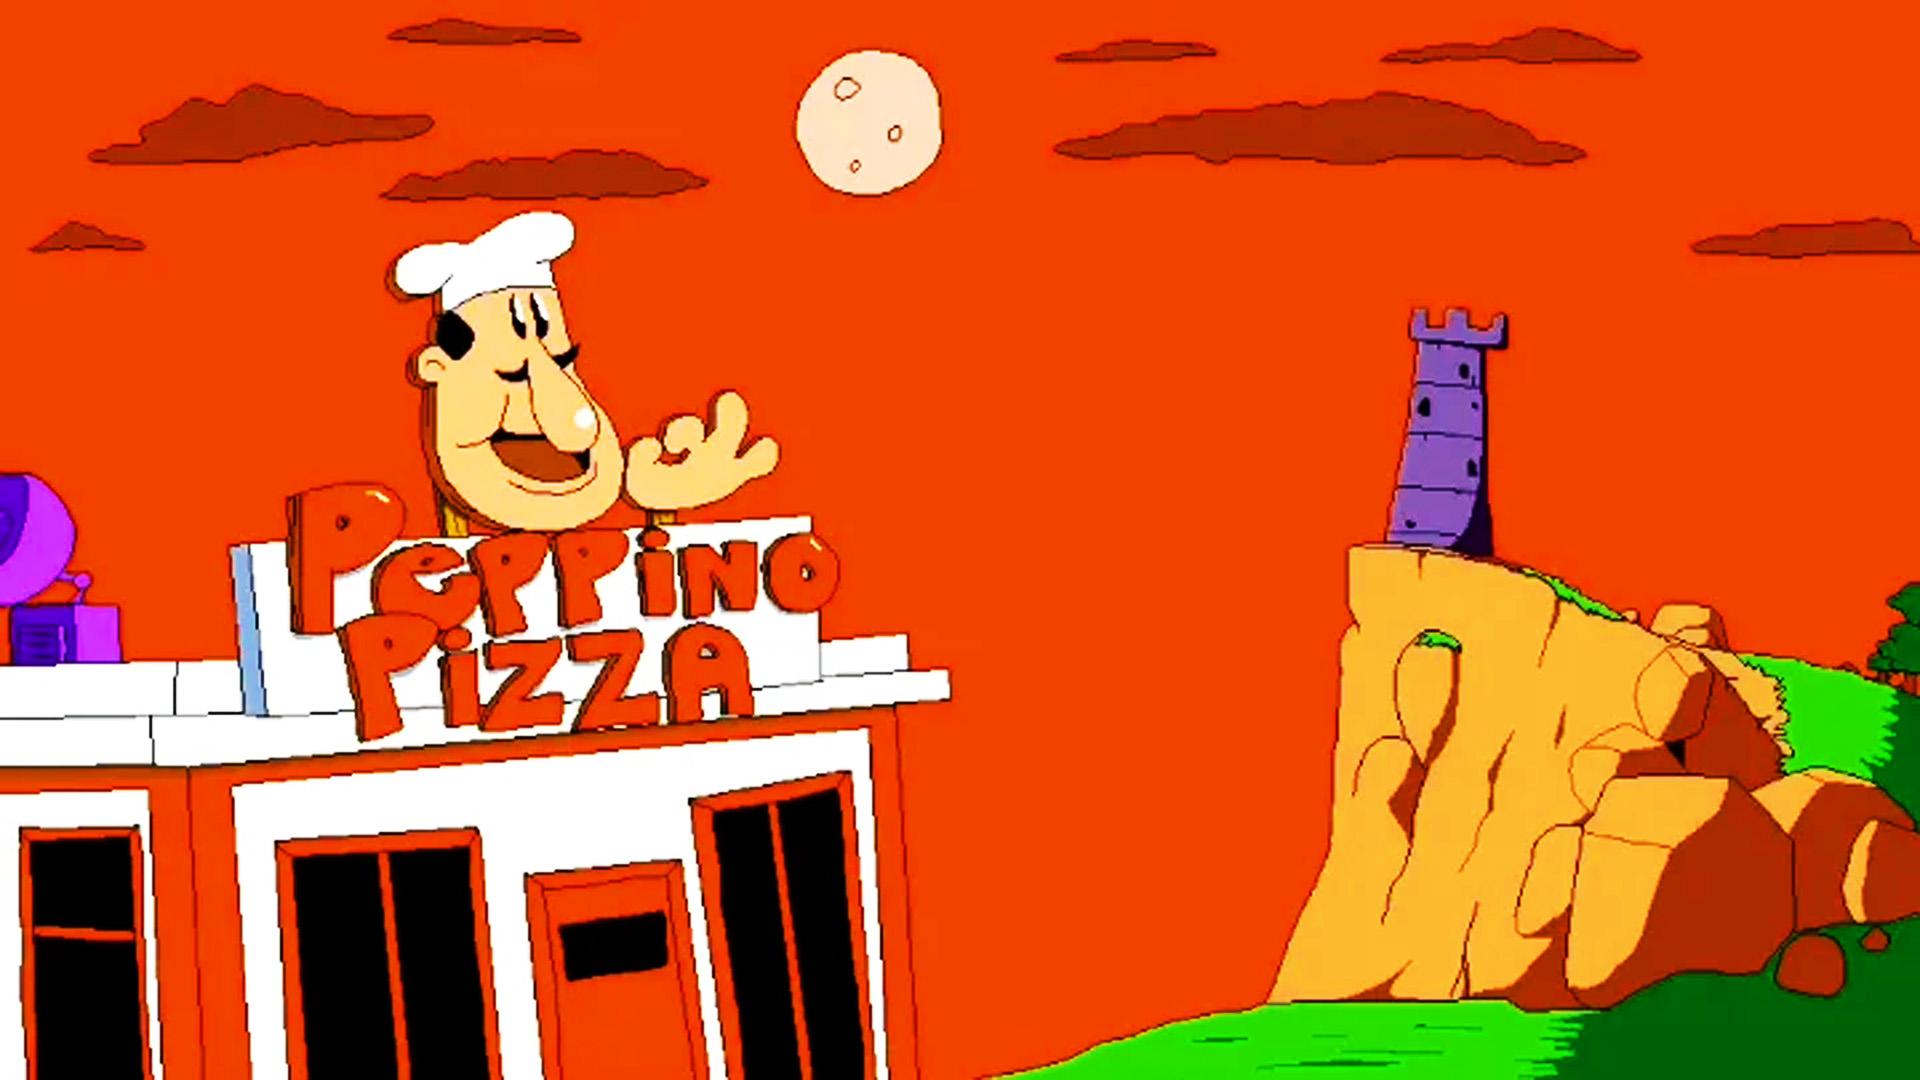 Pizza tower ost noise. Pizza Tower игра. Пеппино pizza Tower. Пепино спагетти pizza Tower. Пицо ТАВЕО.